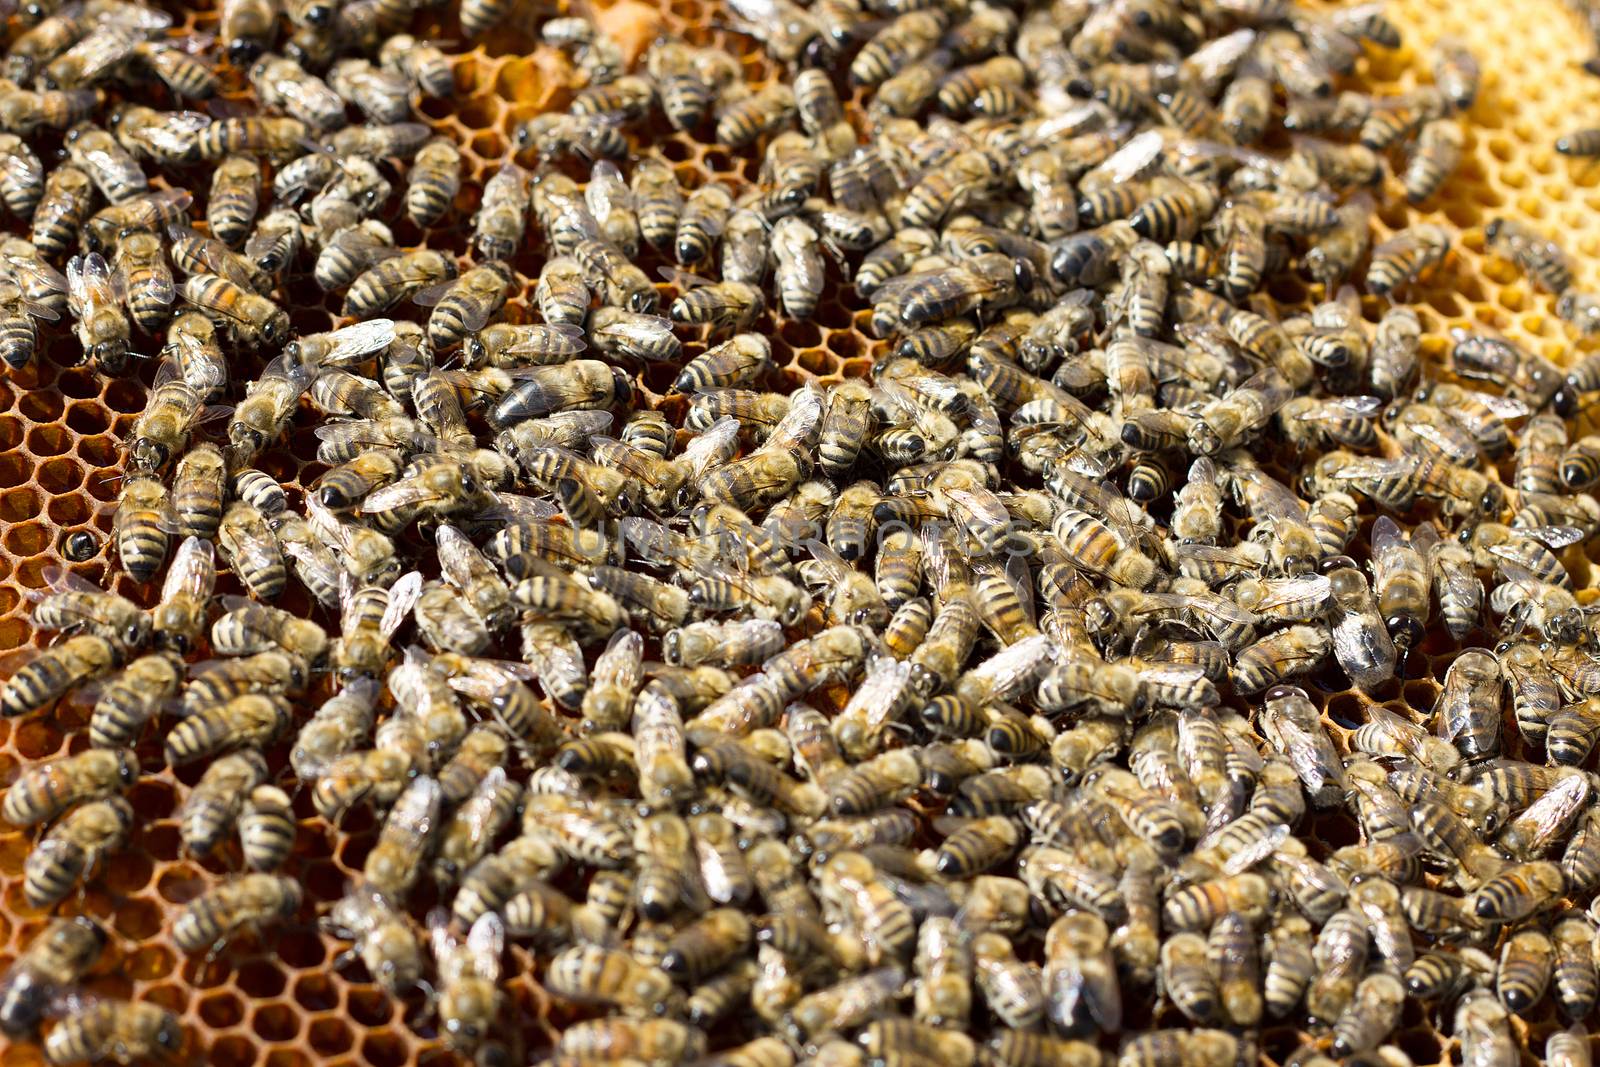 Bees on honeycomb. Closeup of bees on the honeycomb in beehive by kasynets_olena